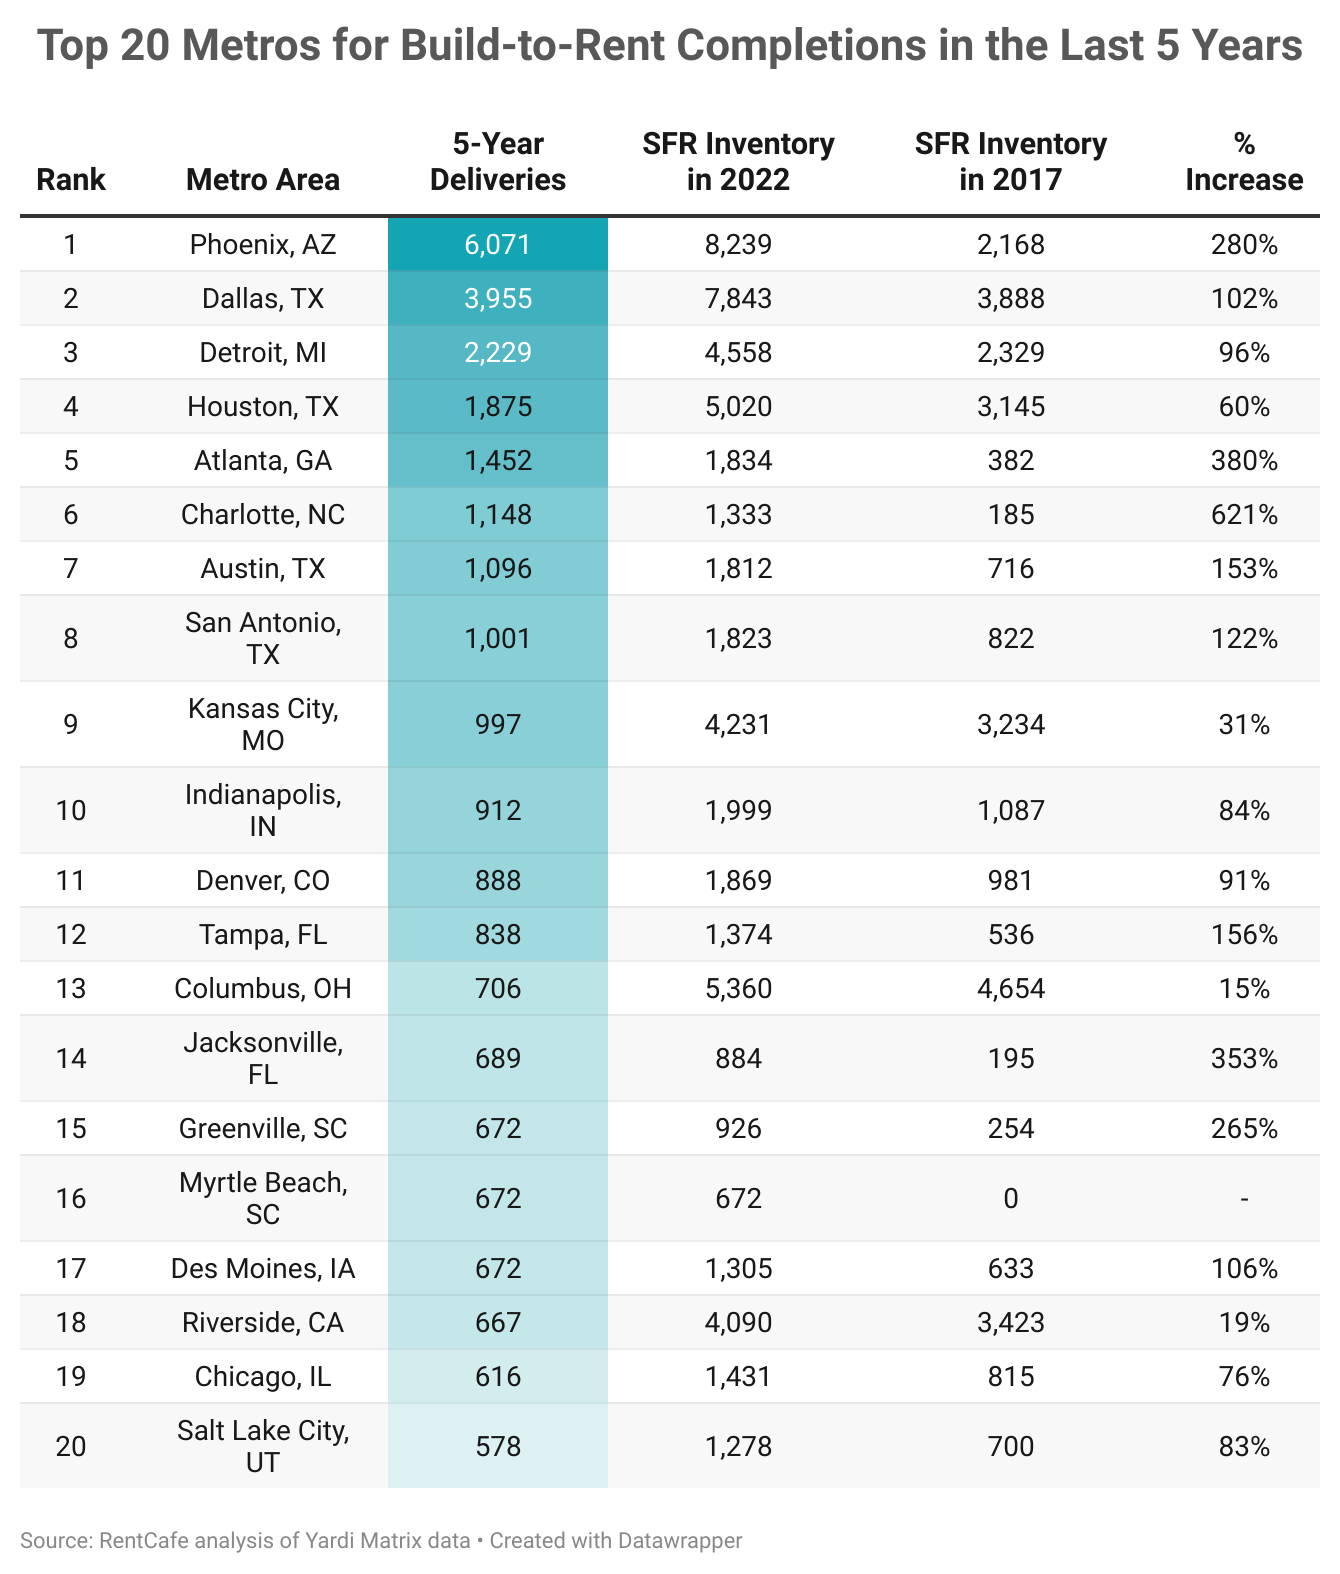 Top 20 metros for built-to-rent completions in the last 5 years